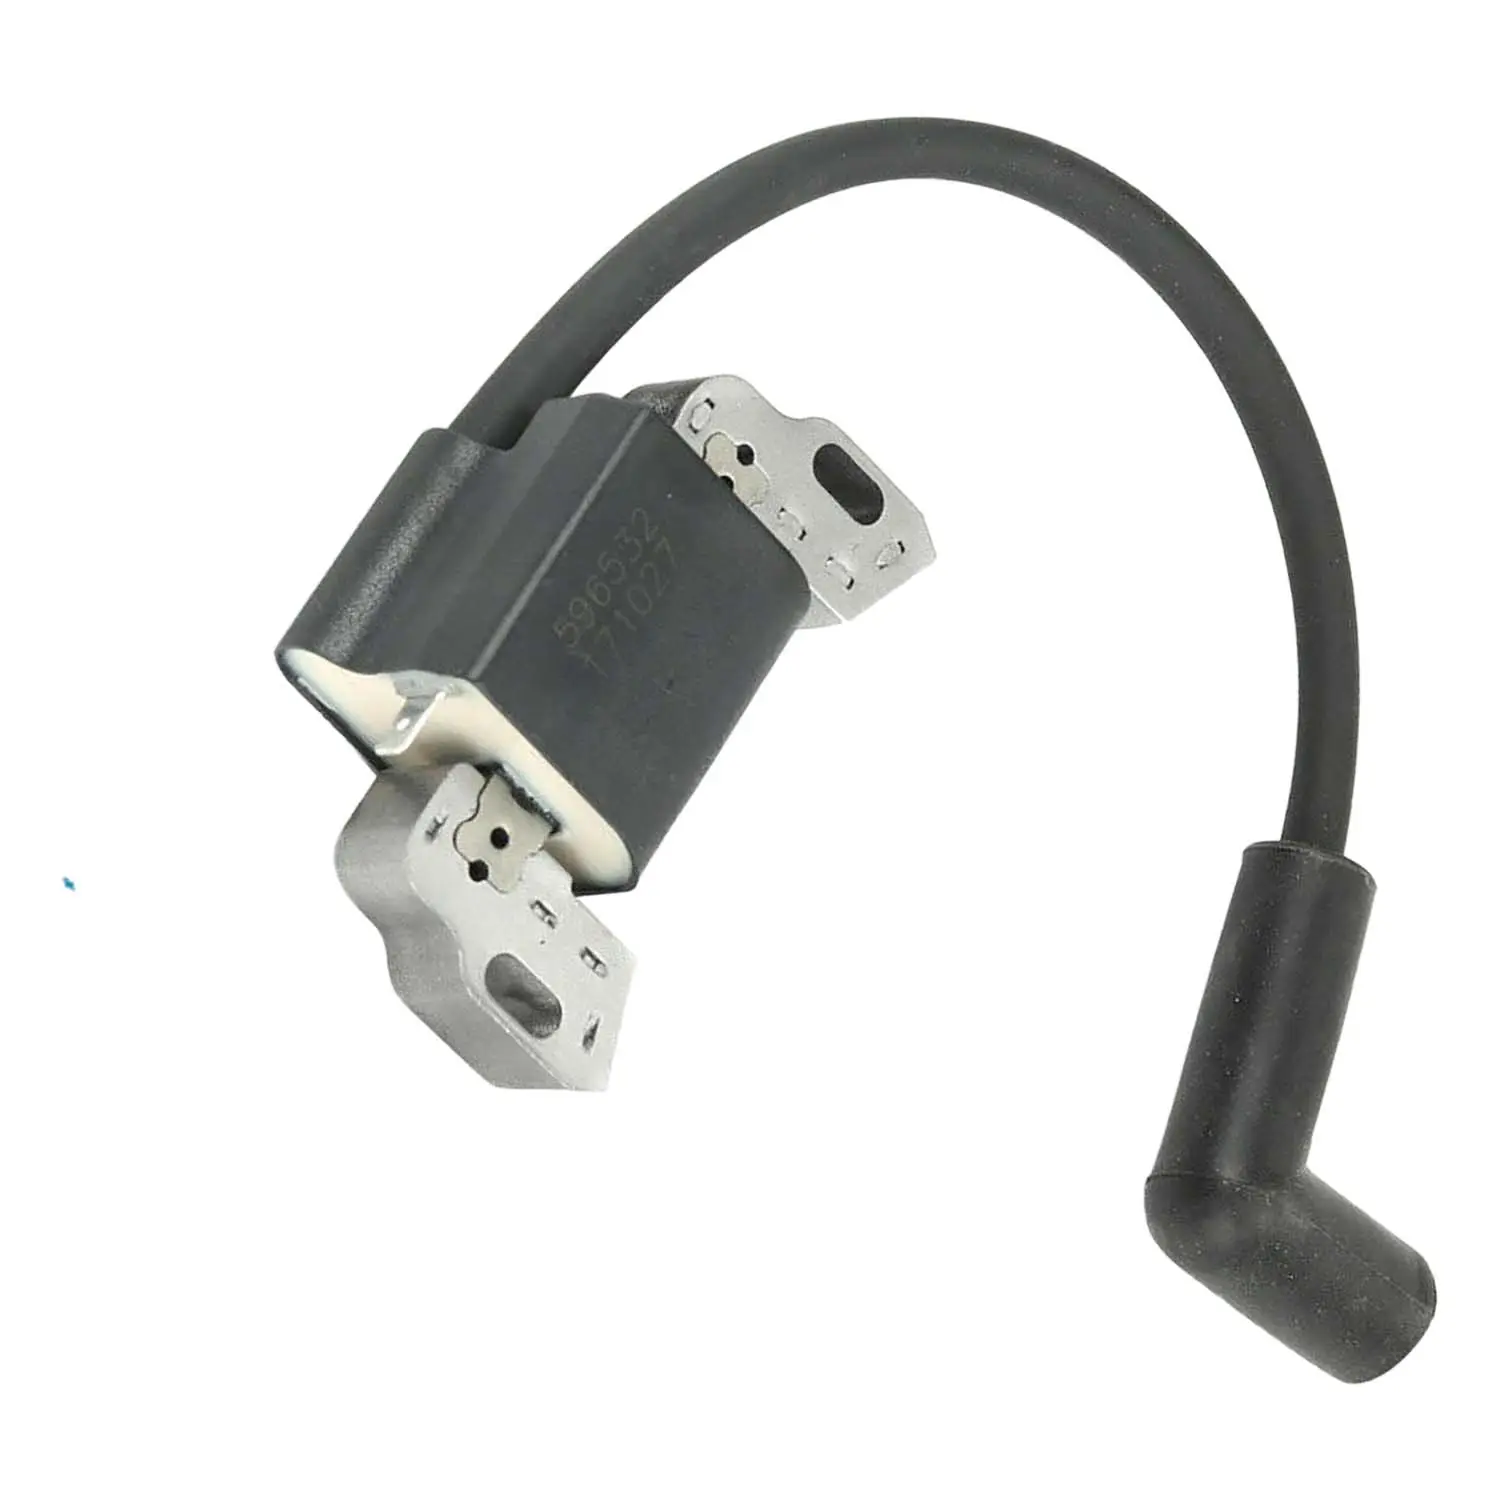 YP  Yuxin Ignition Module Coil for Briggs   Stratton 593872 595009 596532 chainsaw ignition coil lawn mower parts